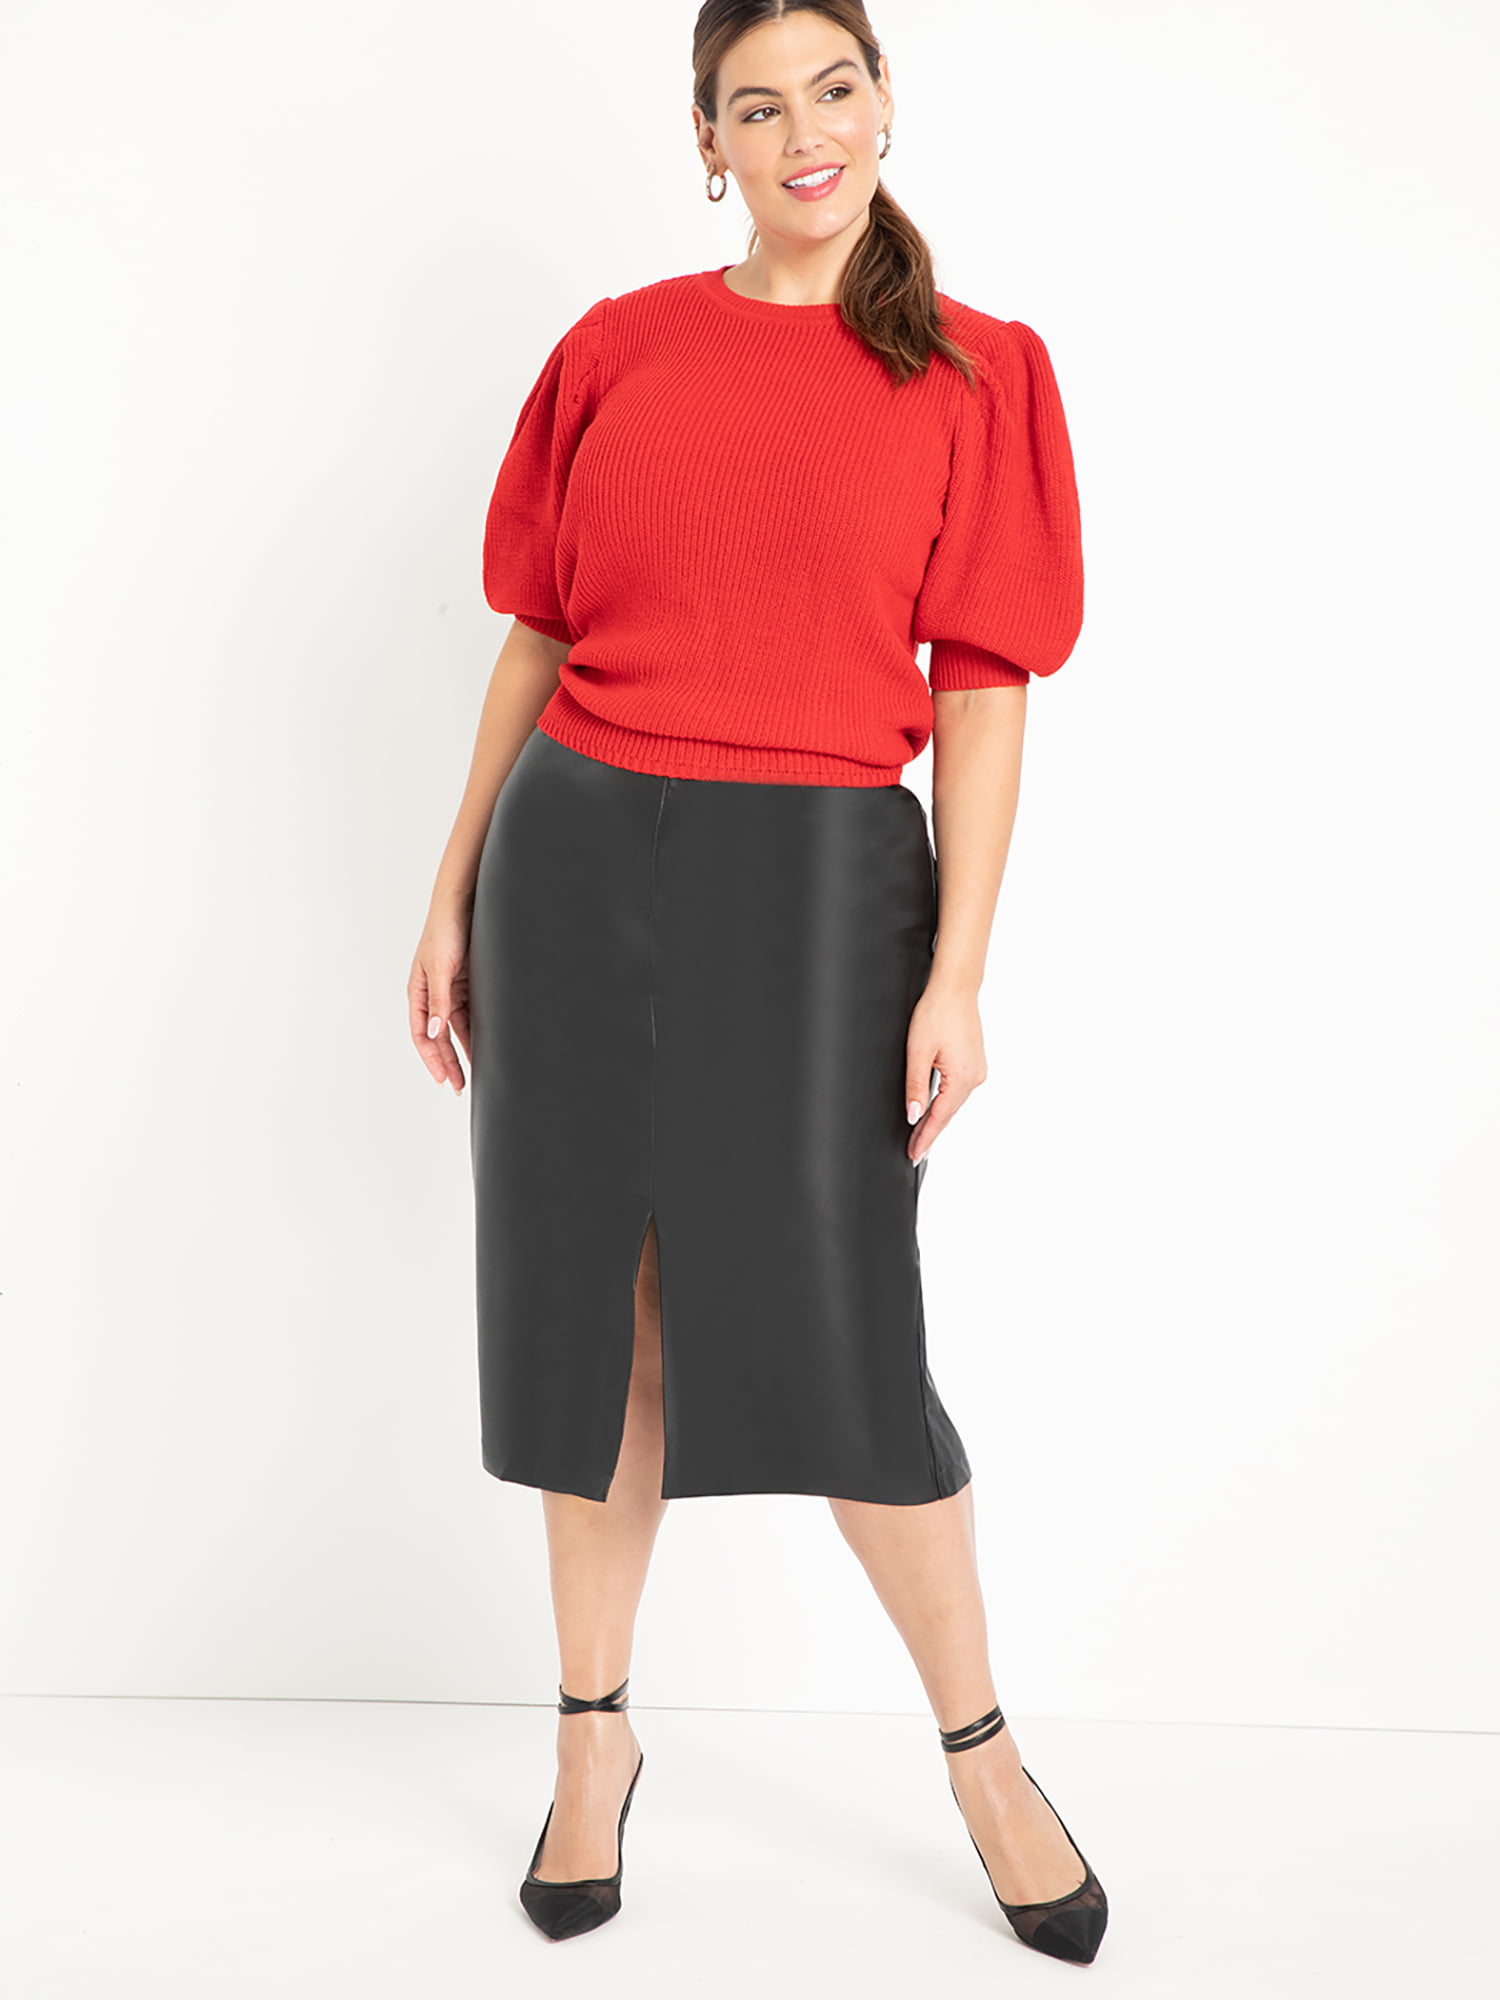 Faux Leather Plus Size Look Book with Eloquii - The Huntswoman